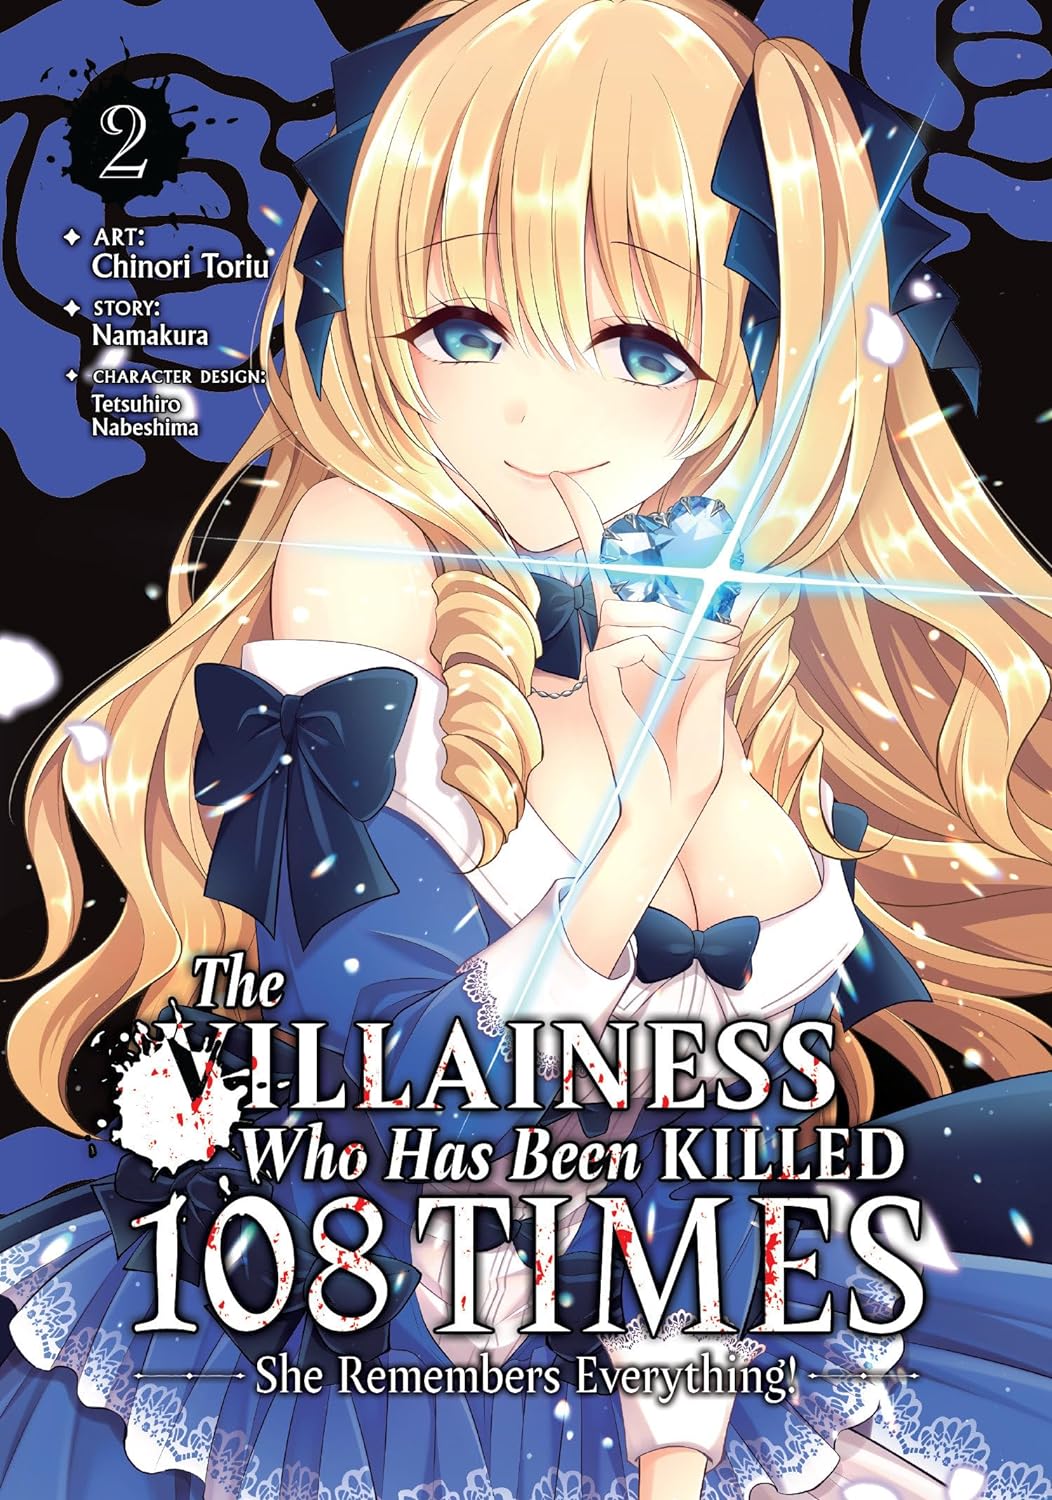 The Villainess Who Has Been Killed 108 Times: She Remembers Everything! (Manga) Vol. 02